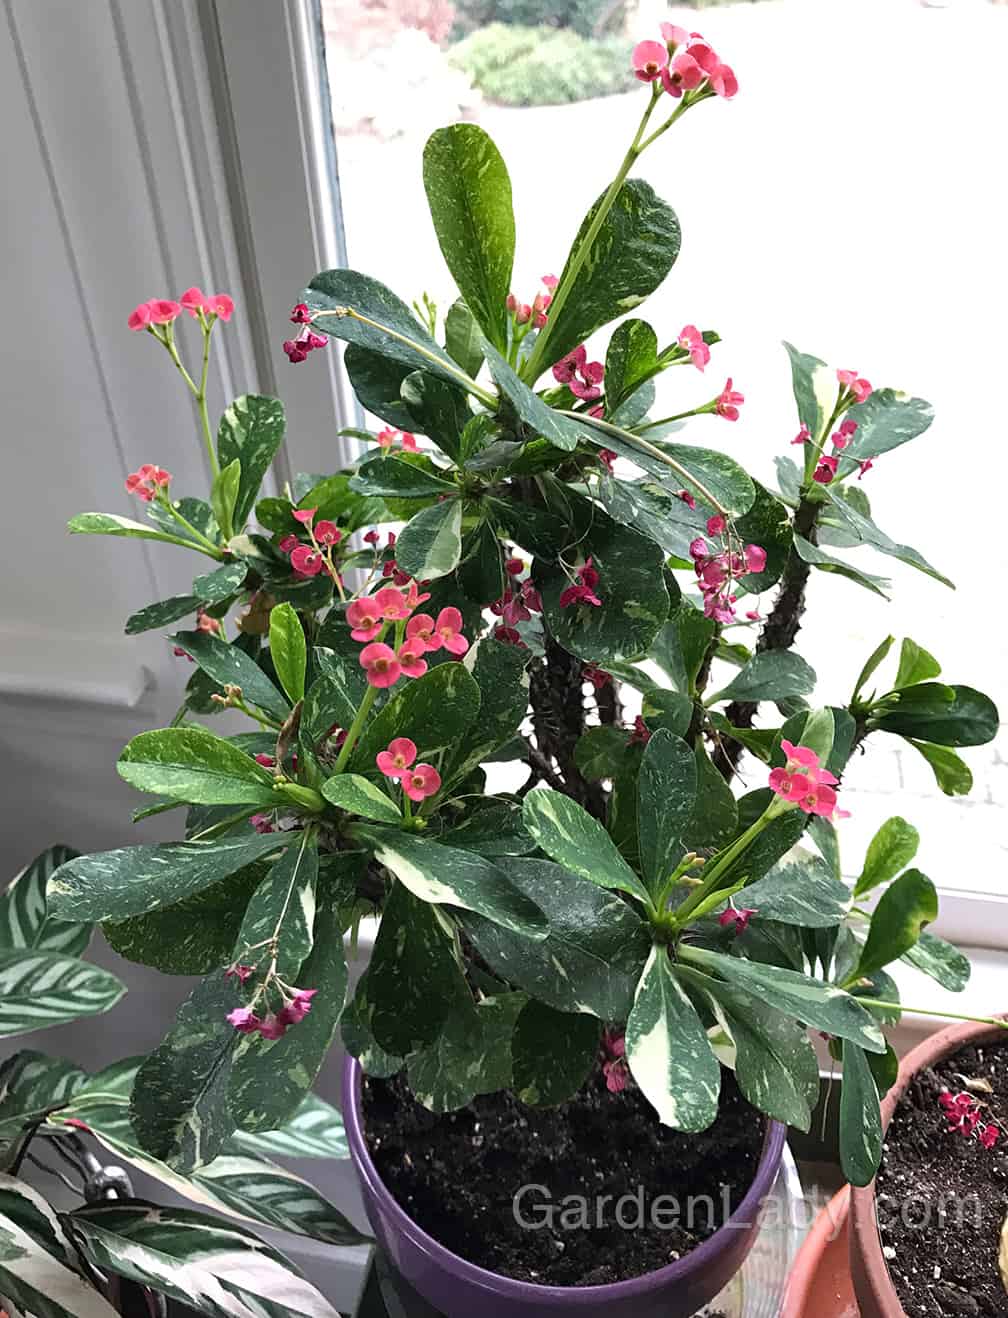 This variegated crown of thorns (Euphorbia milii) is happy in a sunny window. Like many of my houseplants, it gets sent to "summer camp" outdoors in the warmer months. It also gets fertilized regularly.